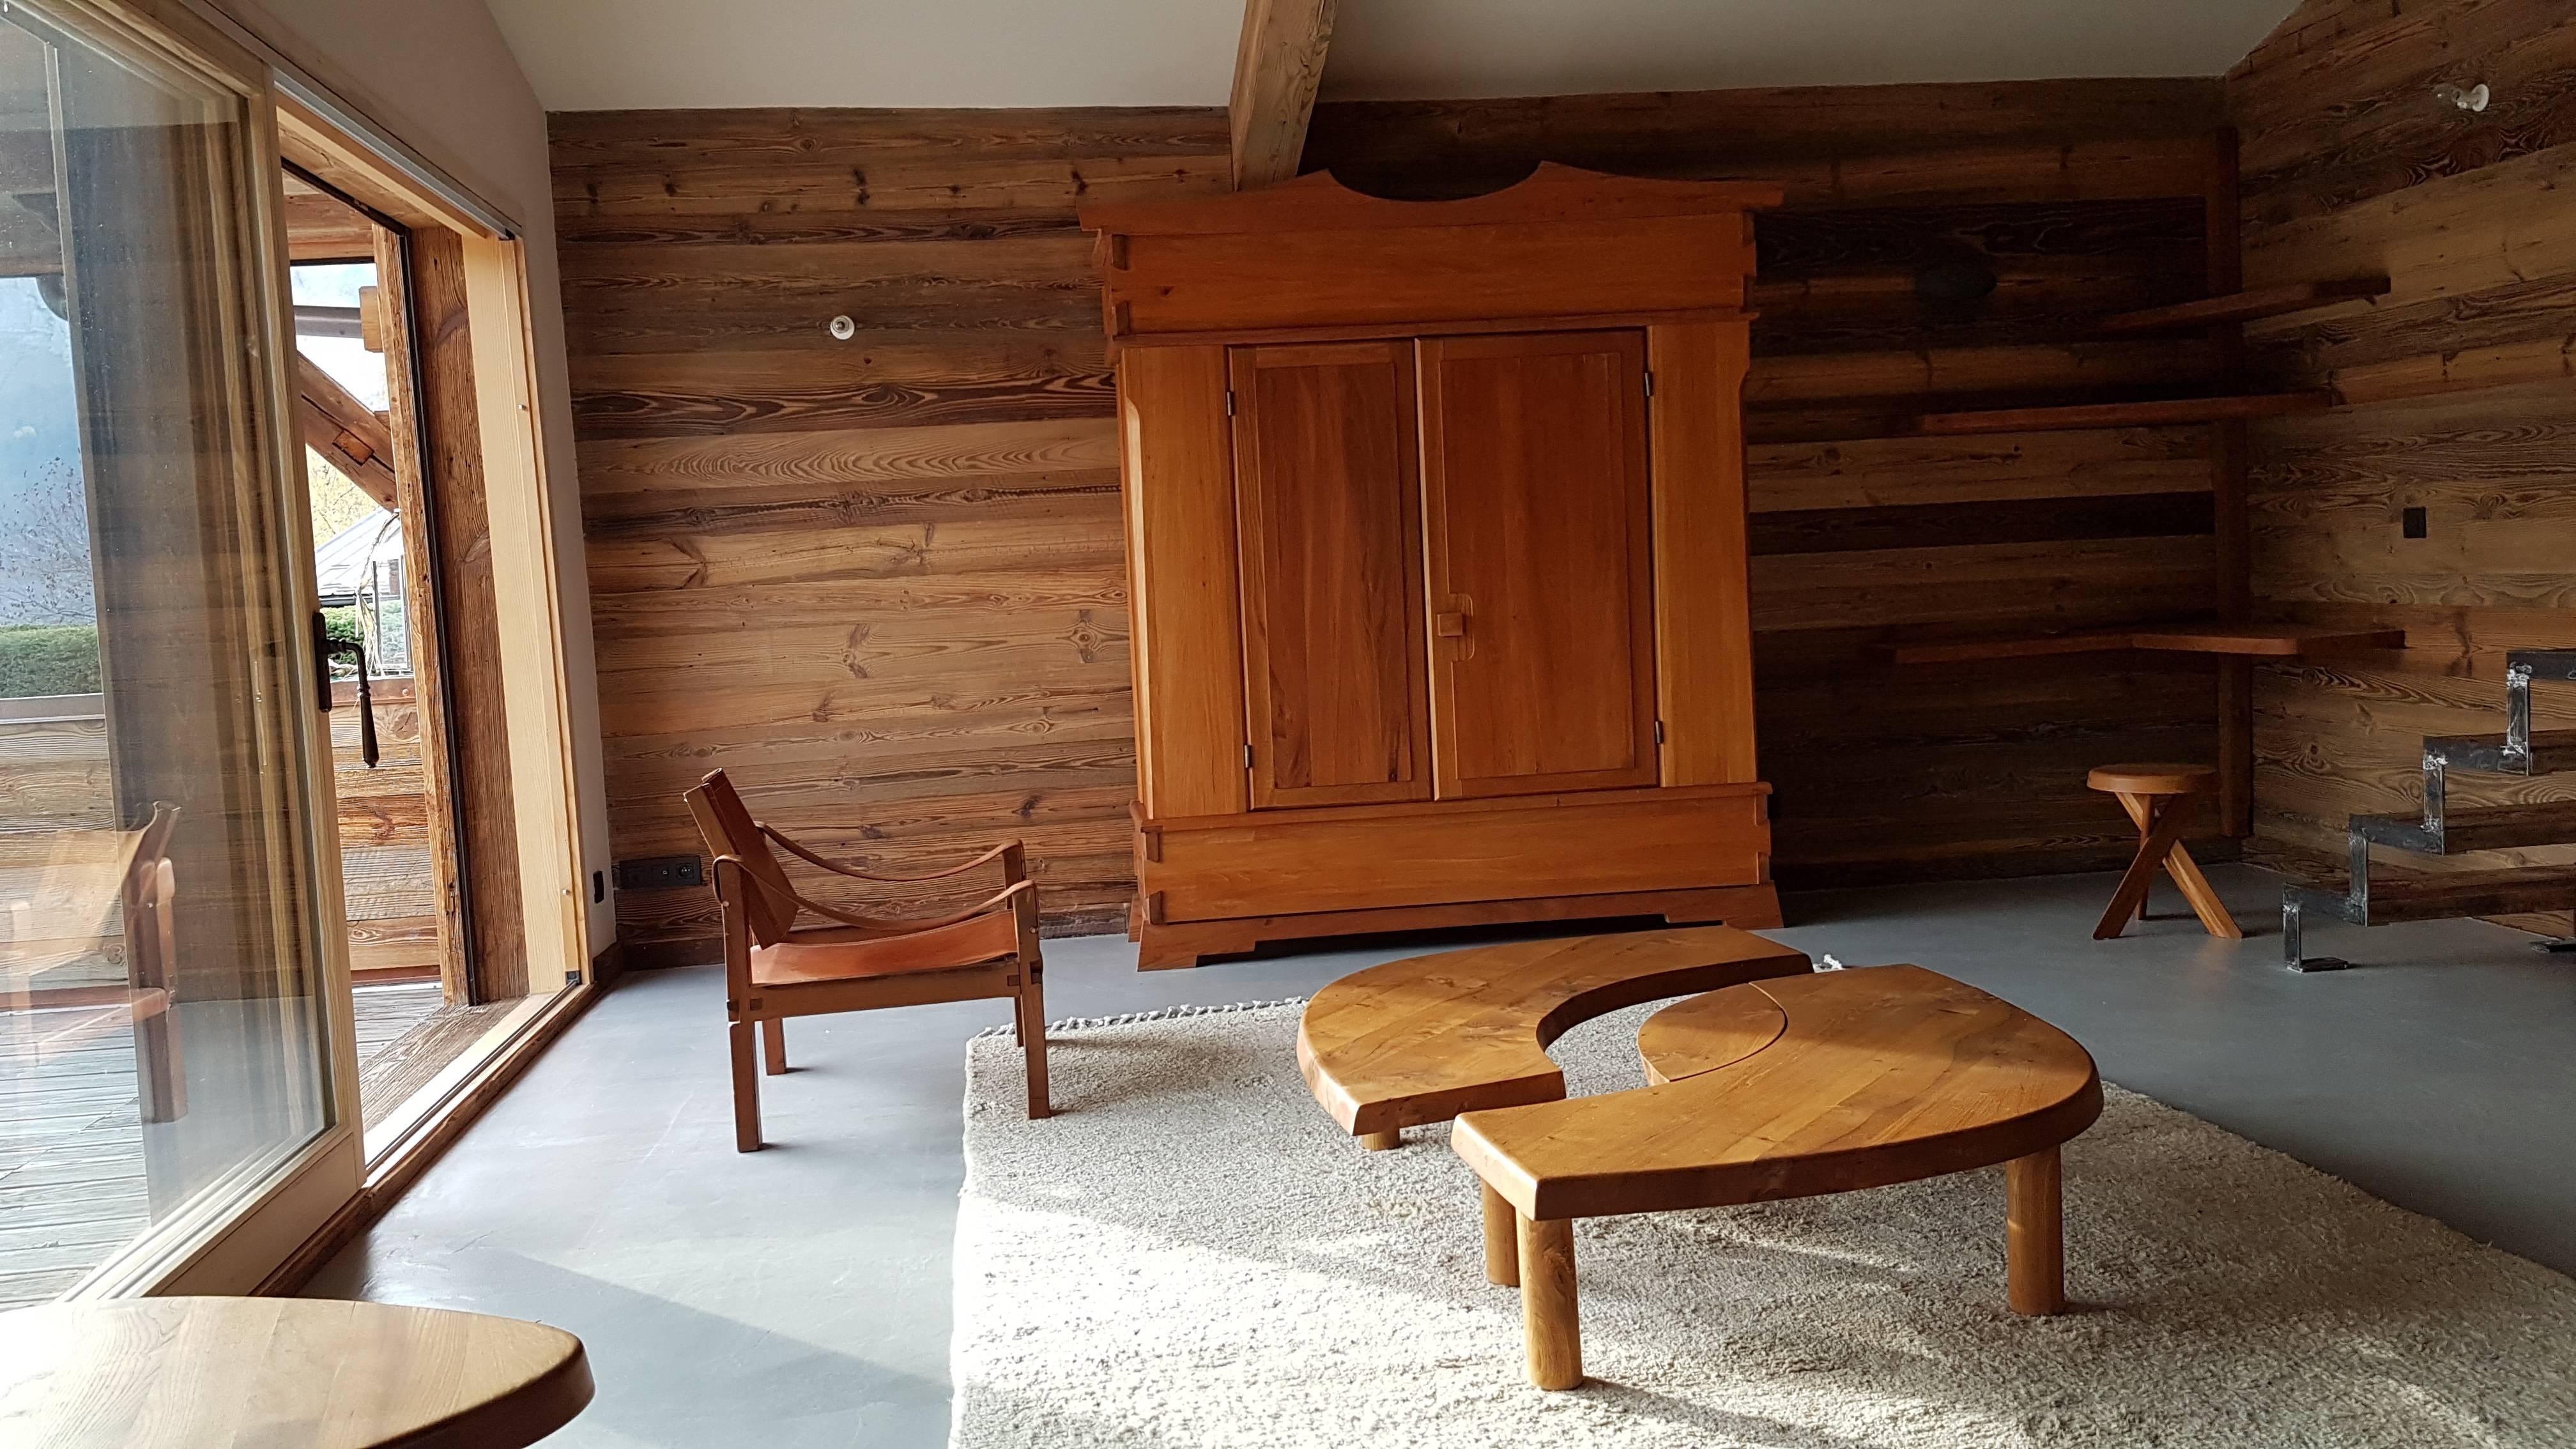 Monumental wardrobe of Pierre Chapo R 02 B in French elm of 1970 signed. Furniture made in very few copies very rare. Pierre Chapo joins the greatest creators like Charlotte Perriand Le Corbusier and Jean Prouvé.